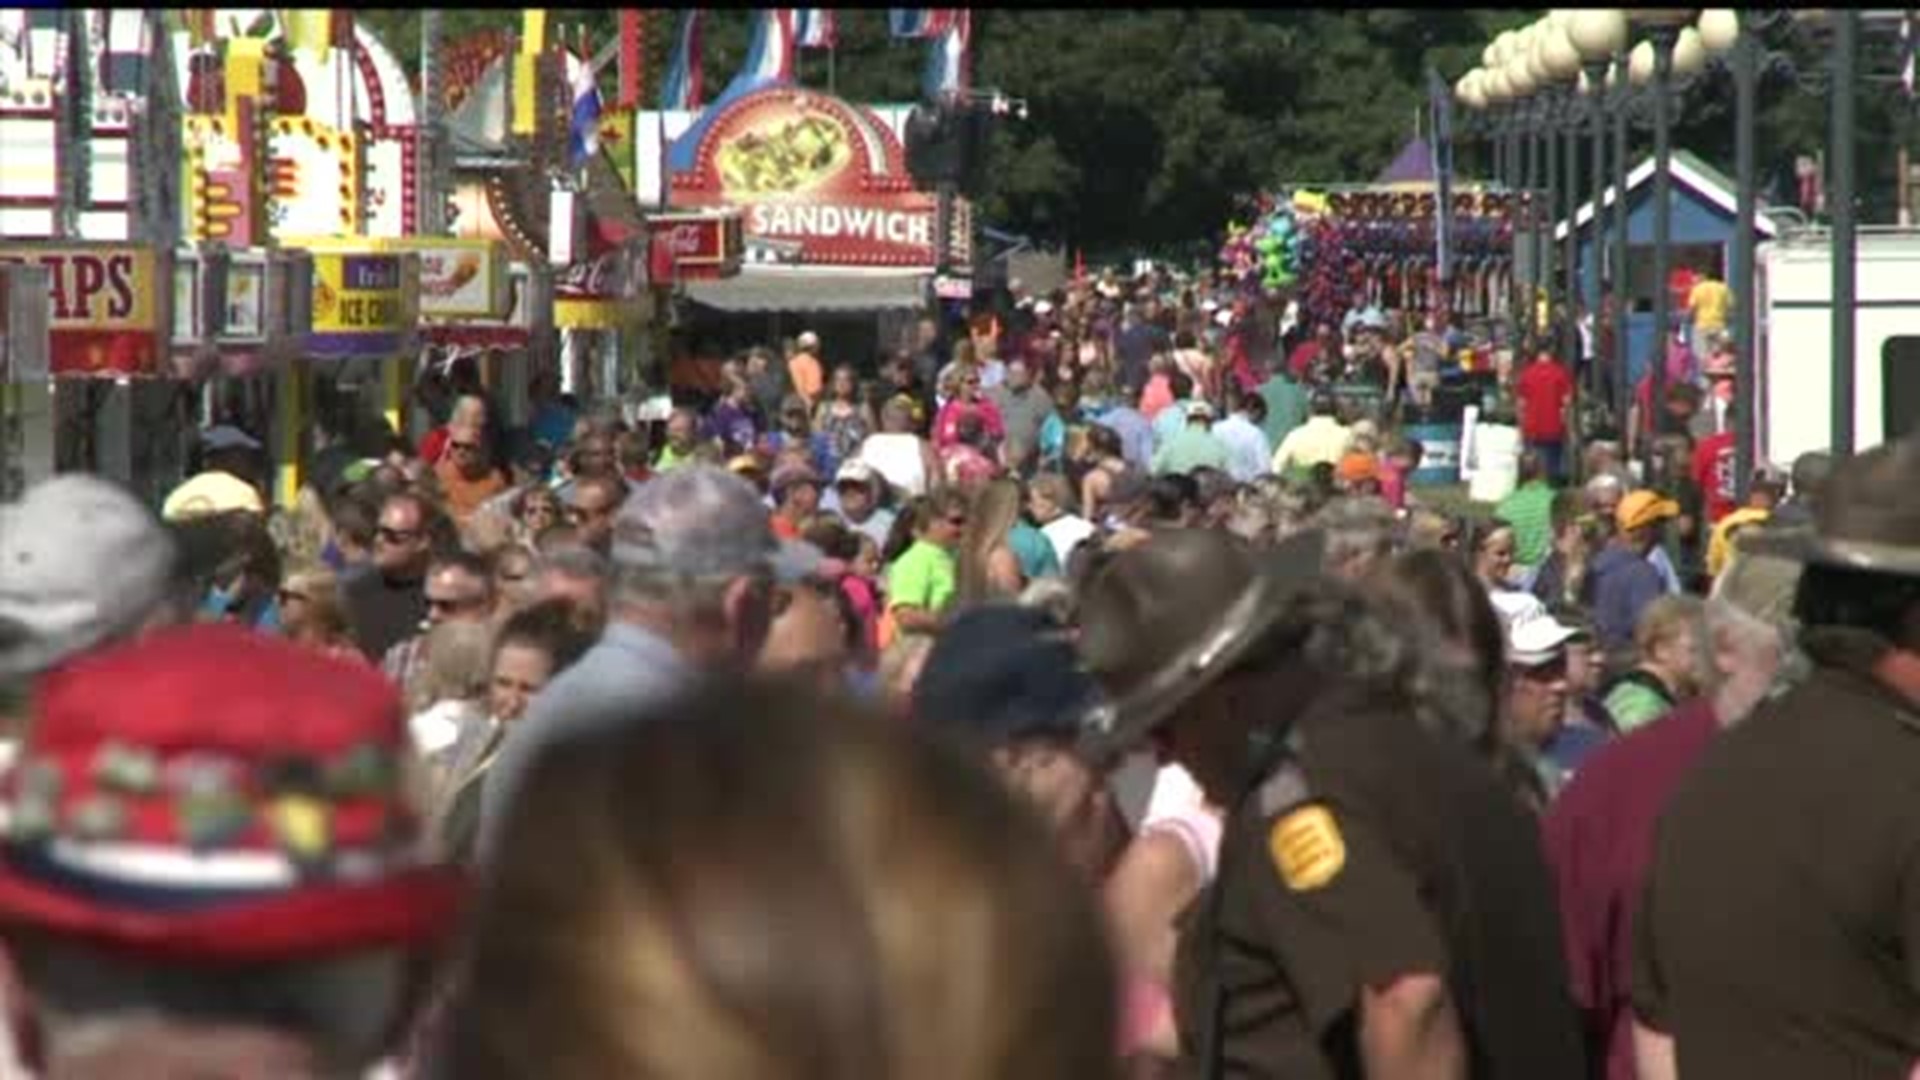 Facebook page features, and sometimes mocks, people at Iowa State Fair